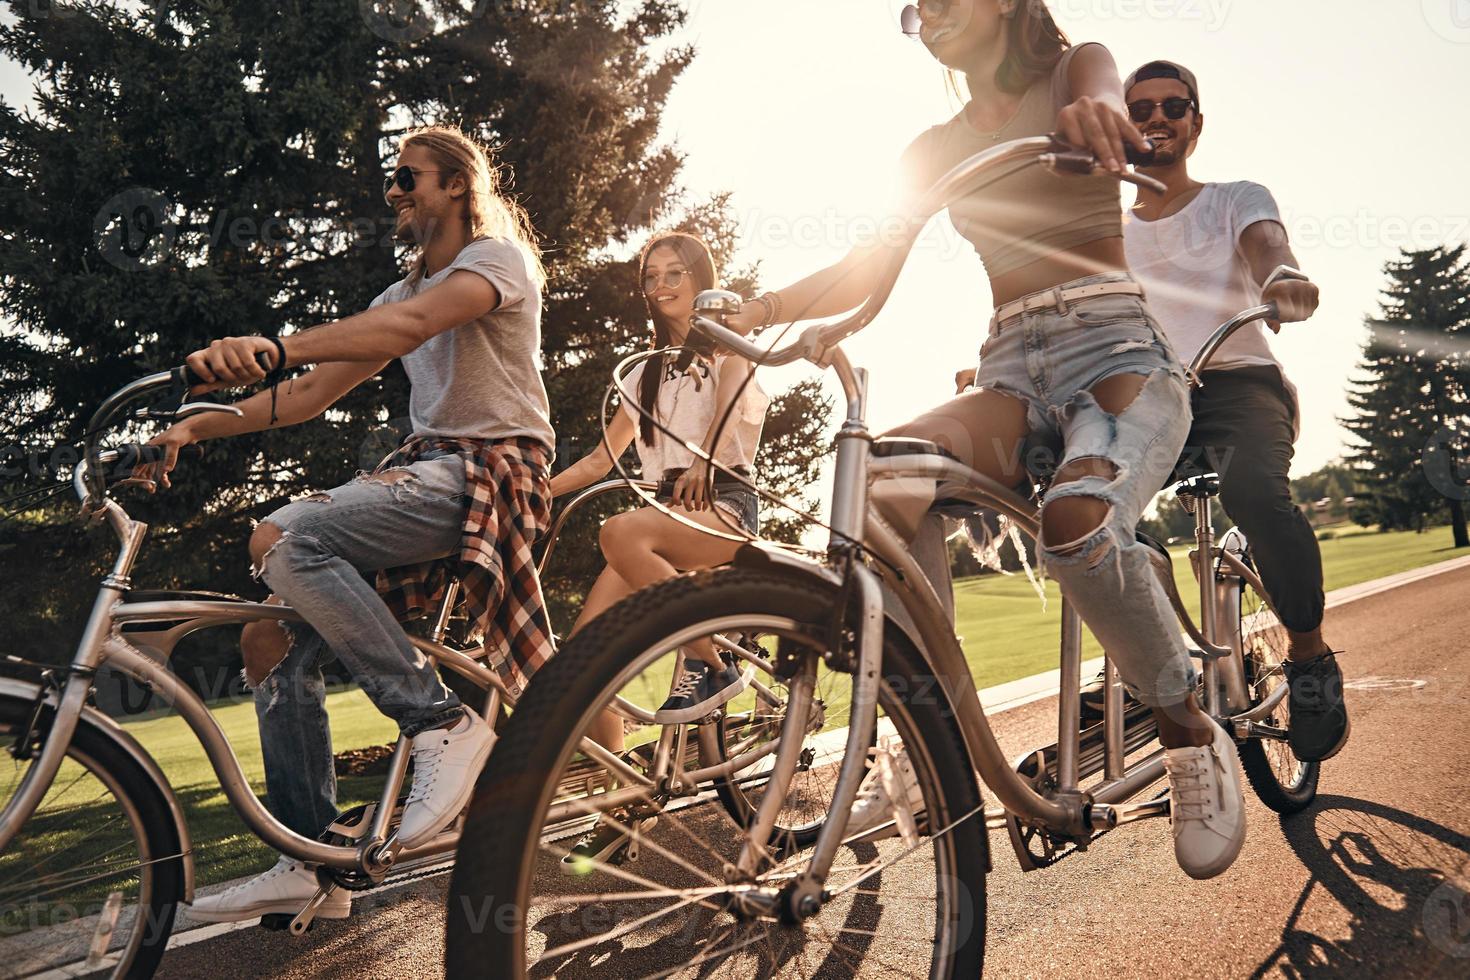 Warm sun and a great company. Group of happy young people in casual wear smiling while cycling together outdoors photo